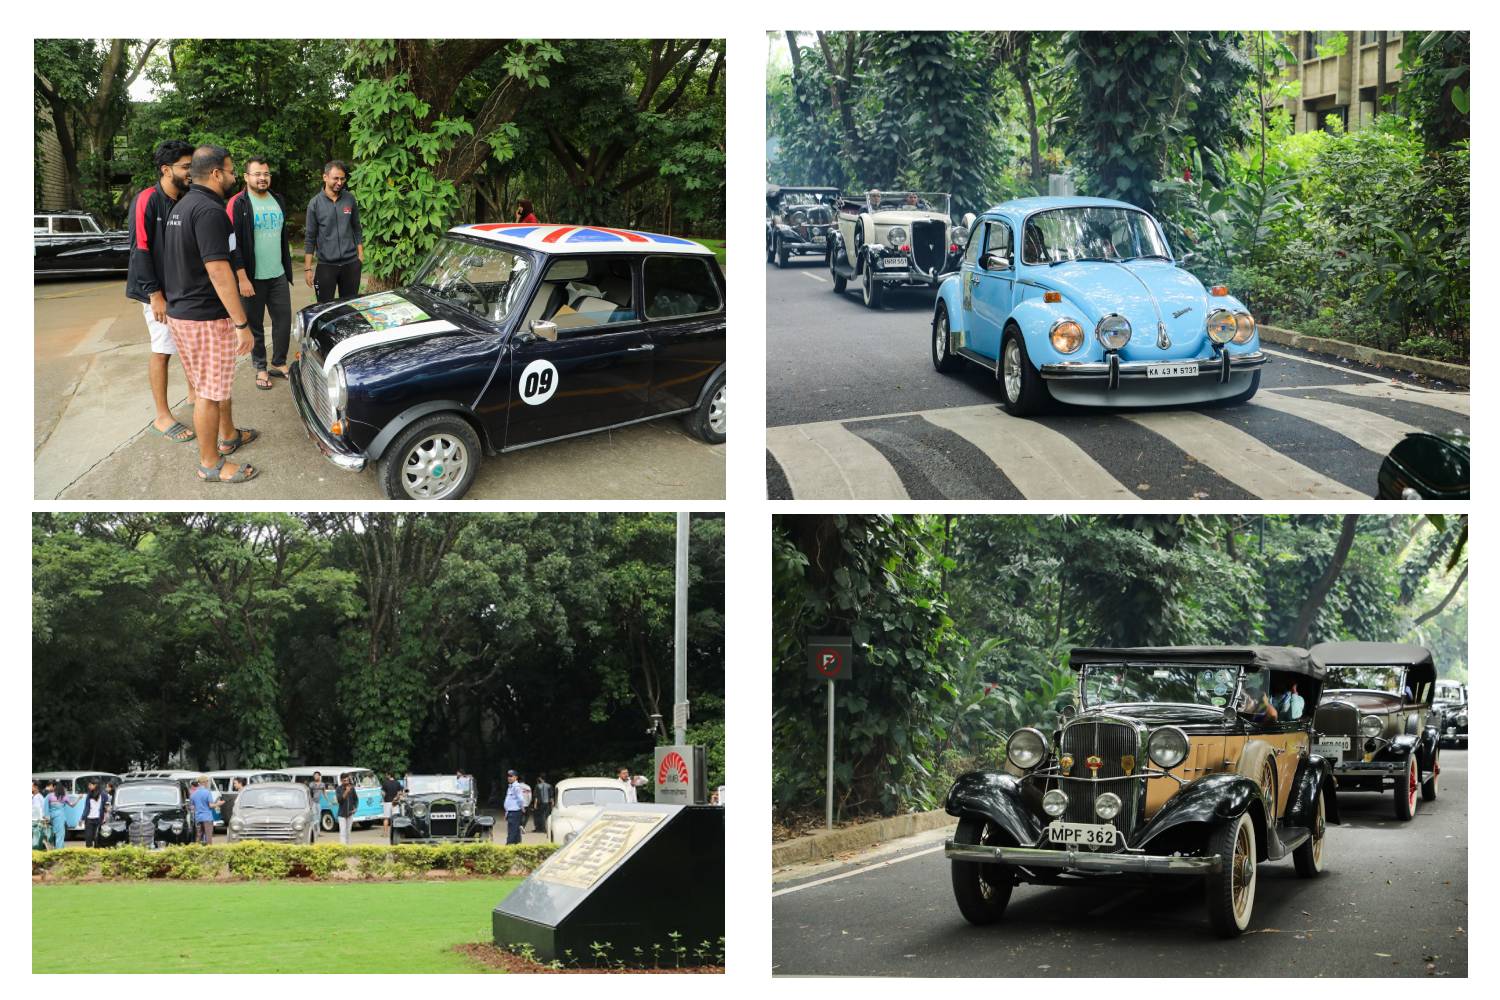 Vintage delight! A vintage ‘Car Drive for Wildlife Conservation’ took place in Bangalore on 01 October 23. The IIMB community got to enjoy the exhibition of the vintage wonders as the rally took a break at IIMB enroute Bannerghatta National Park.